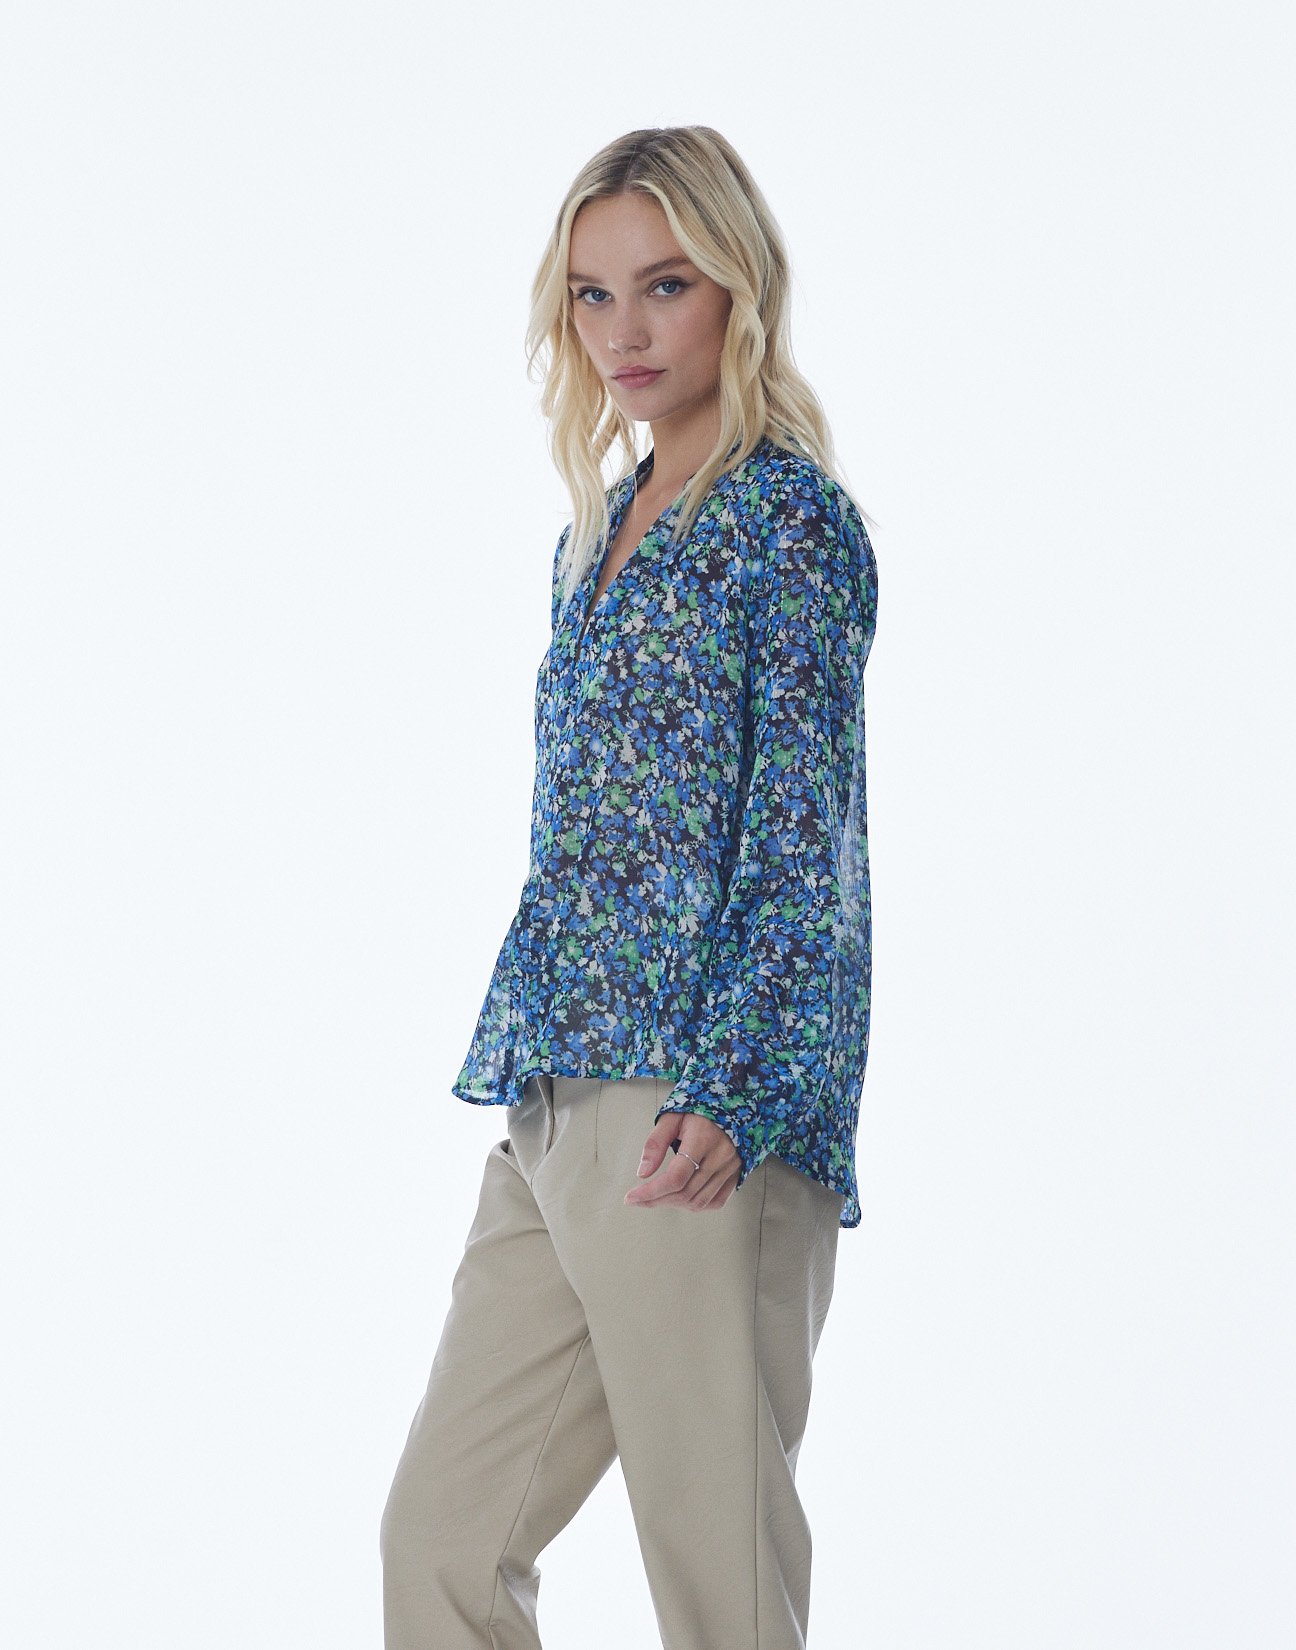 Sheered blouse with buttons